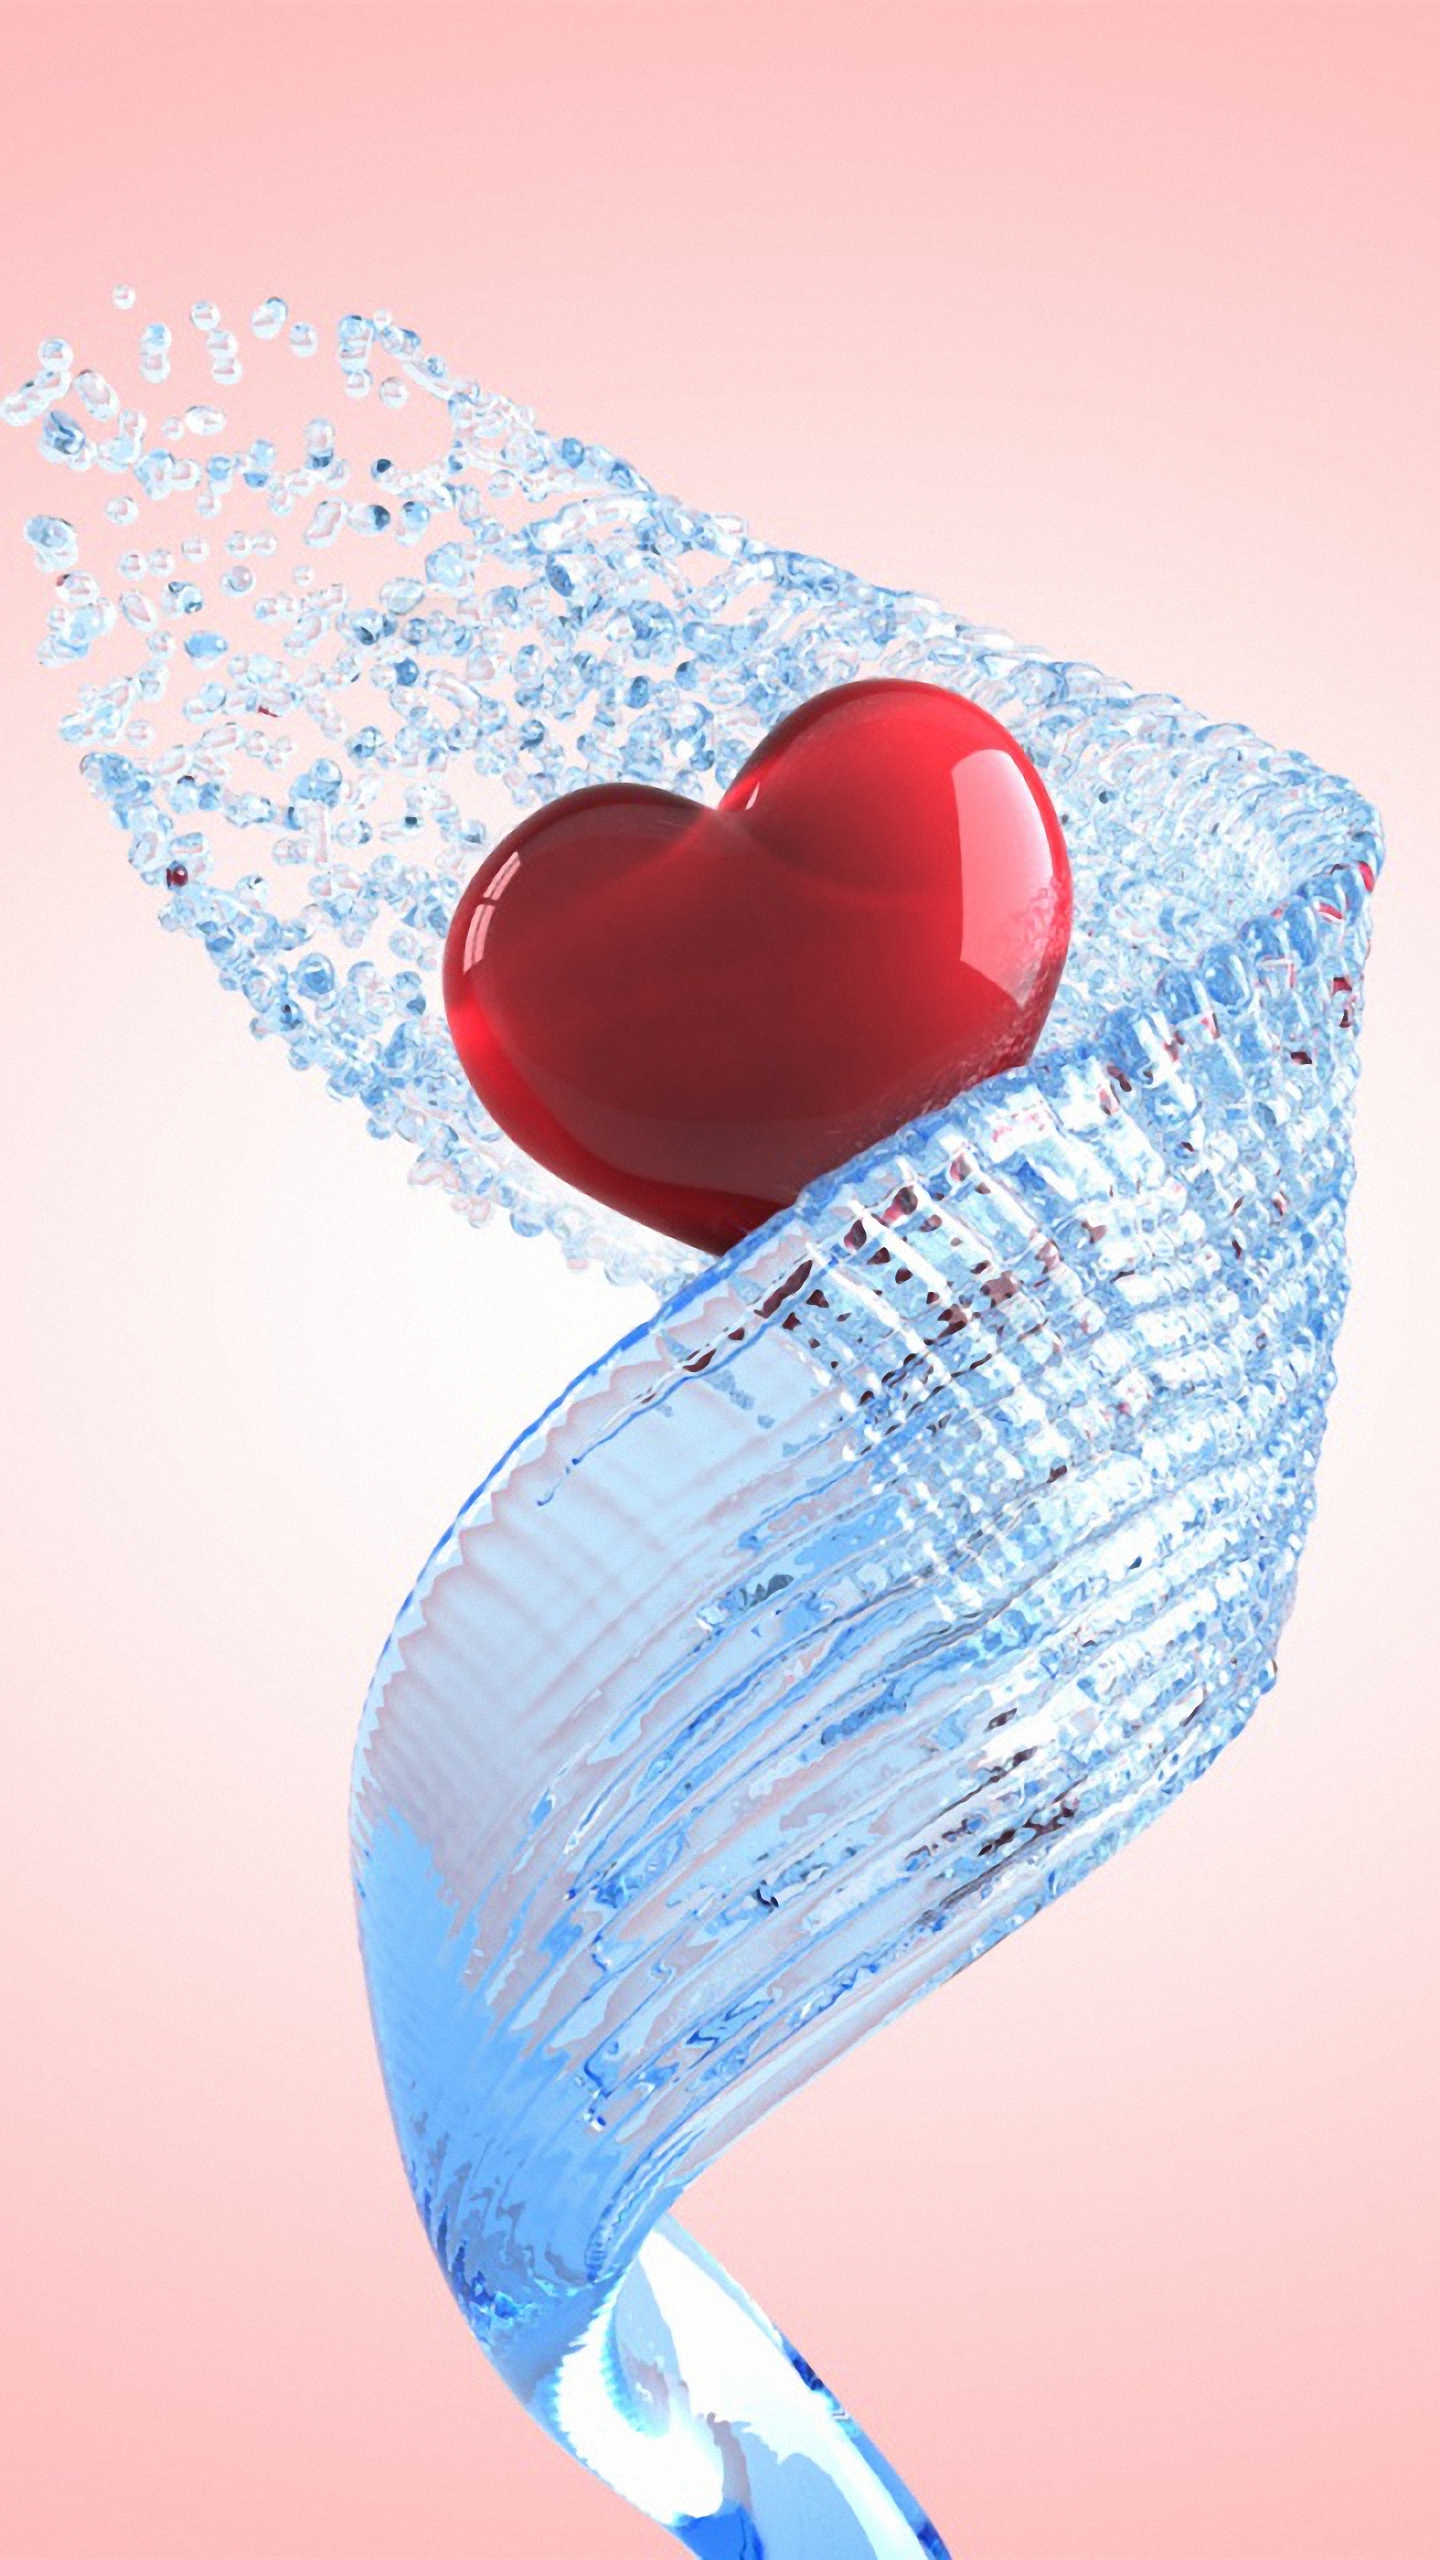 Hd Water Heart Samsung Galaxy Note 4 Wallpapers - Red Water Heart Images Hd - HD Wallpaper 